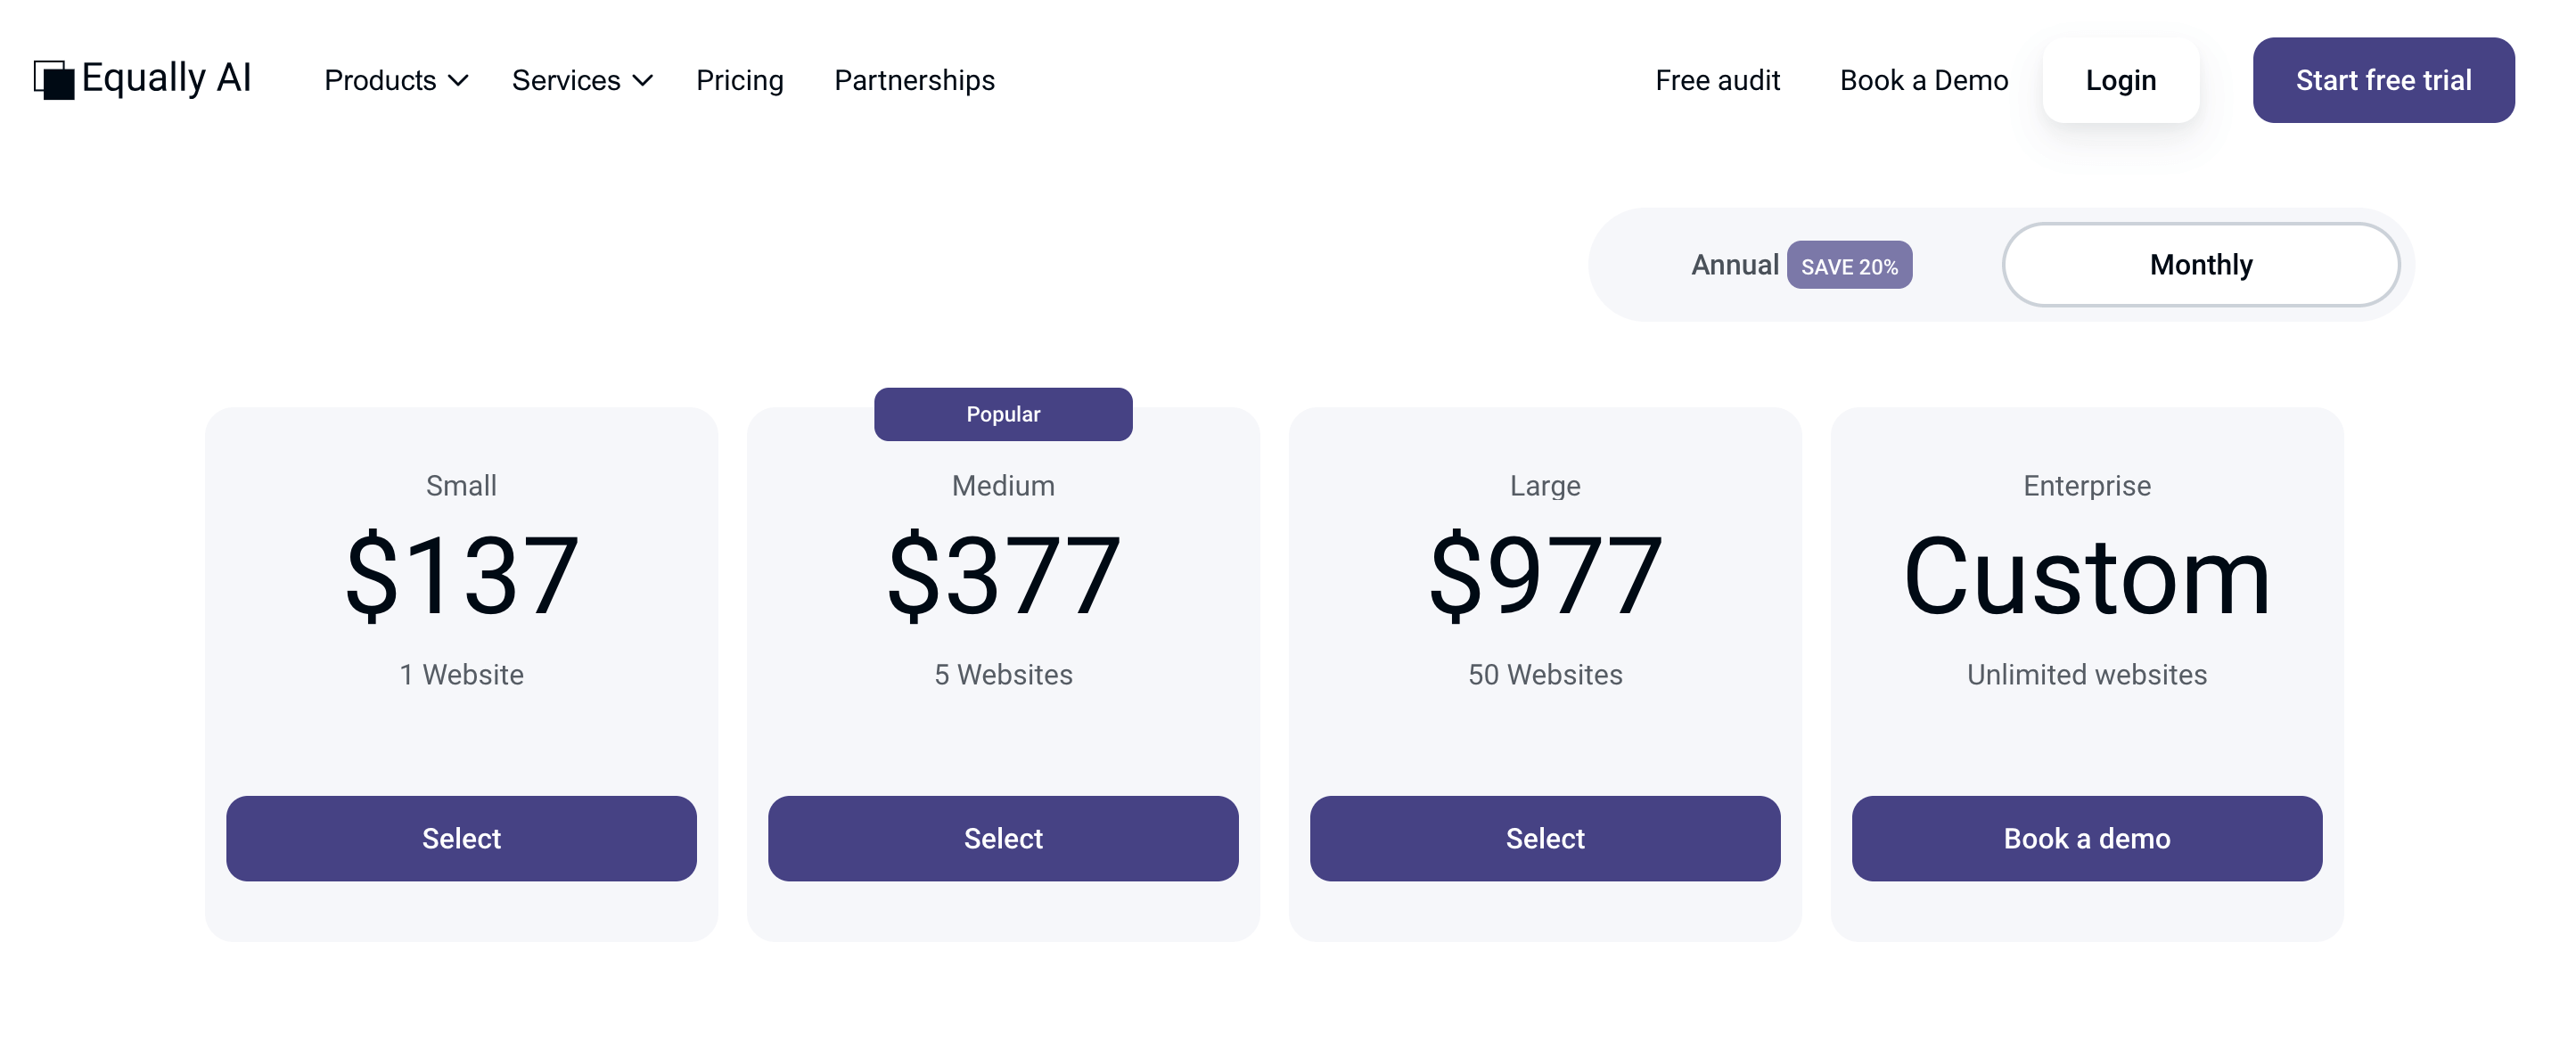 Pricing plans for Equally AI Flowy